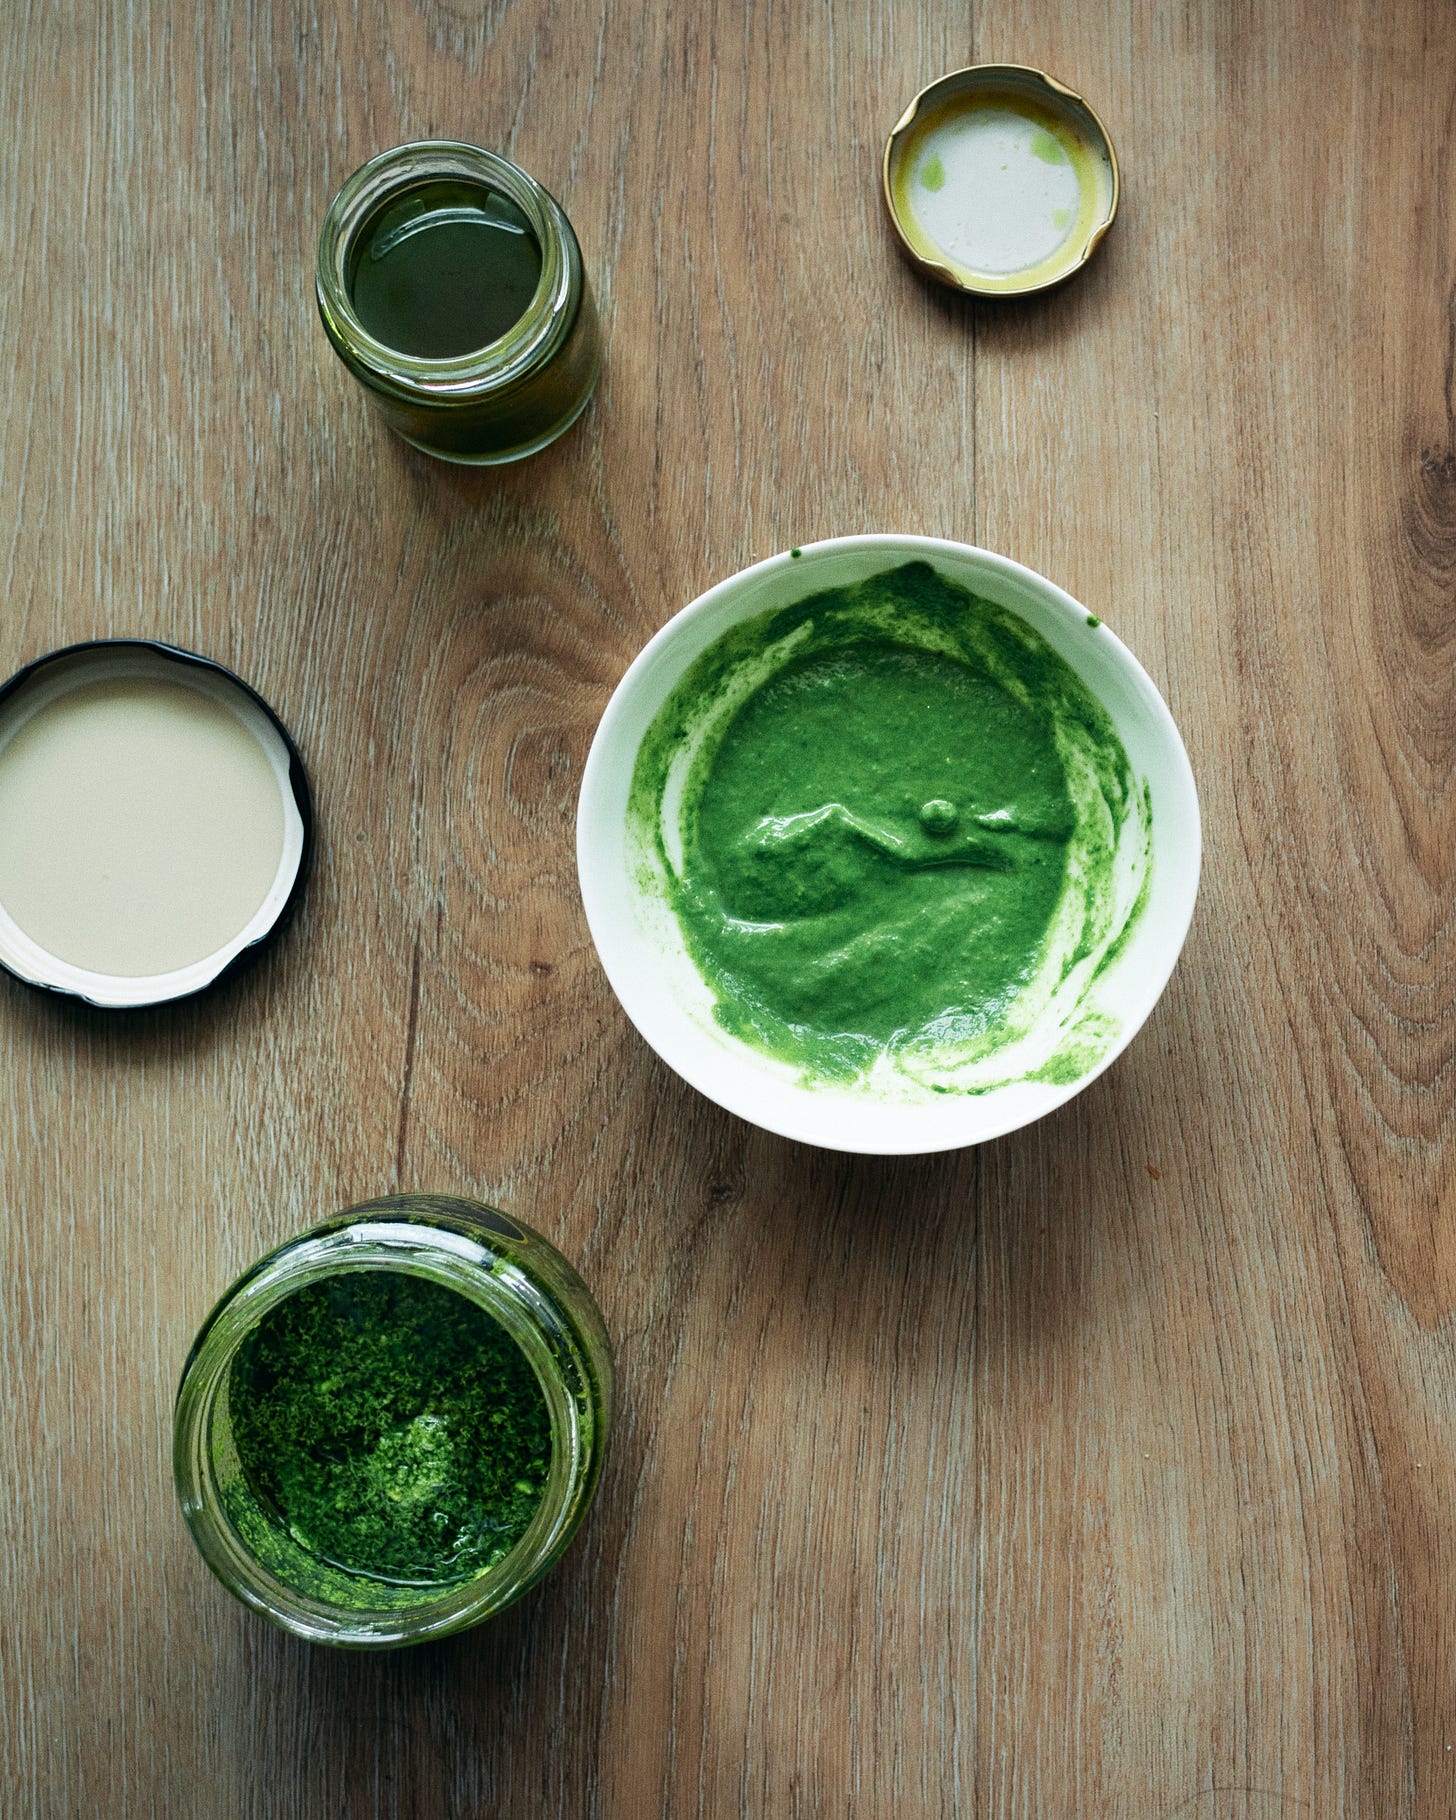 Oil made from green onion, pesto with spinach